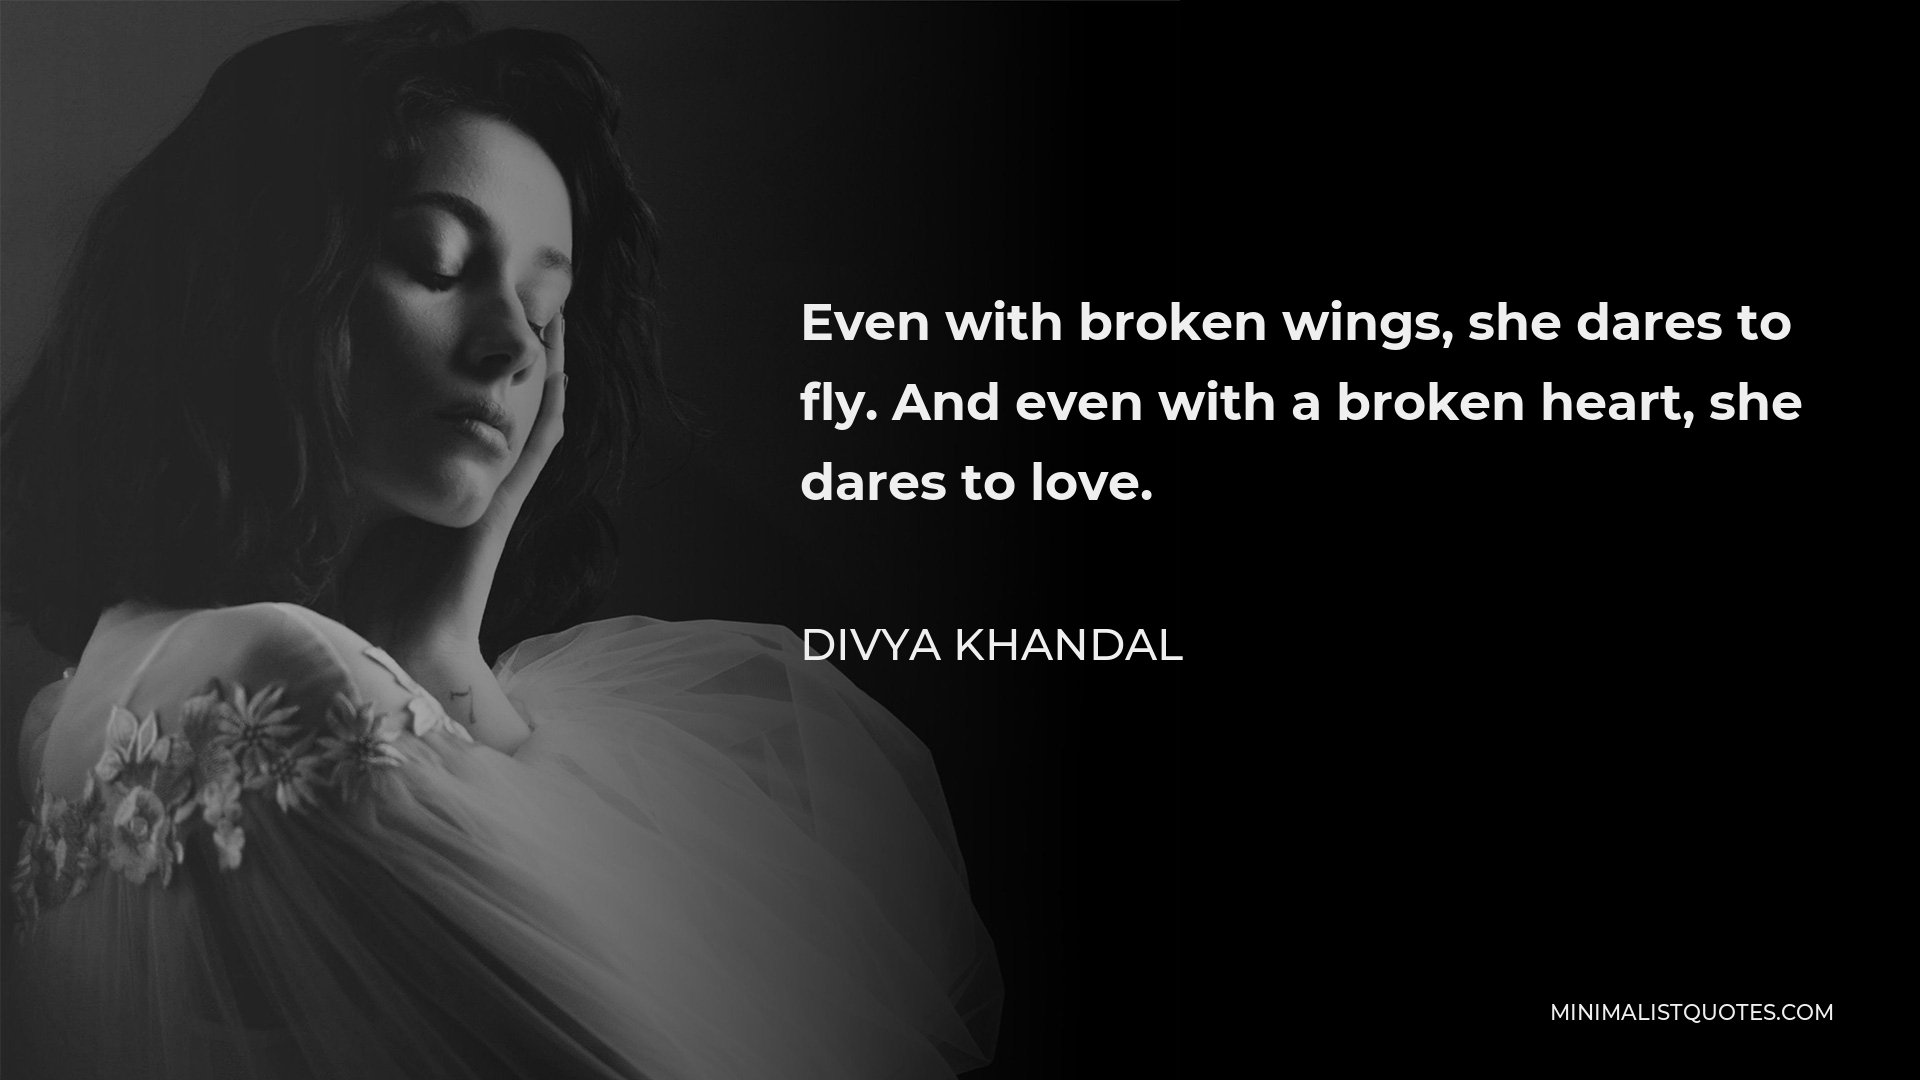 Divya khandal Quote - Even with broken wings, she dares to fly. And even with a broken heart, she dares to love.